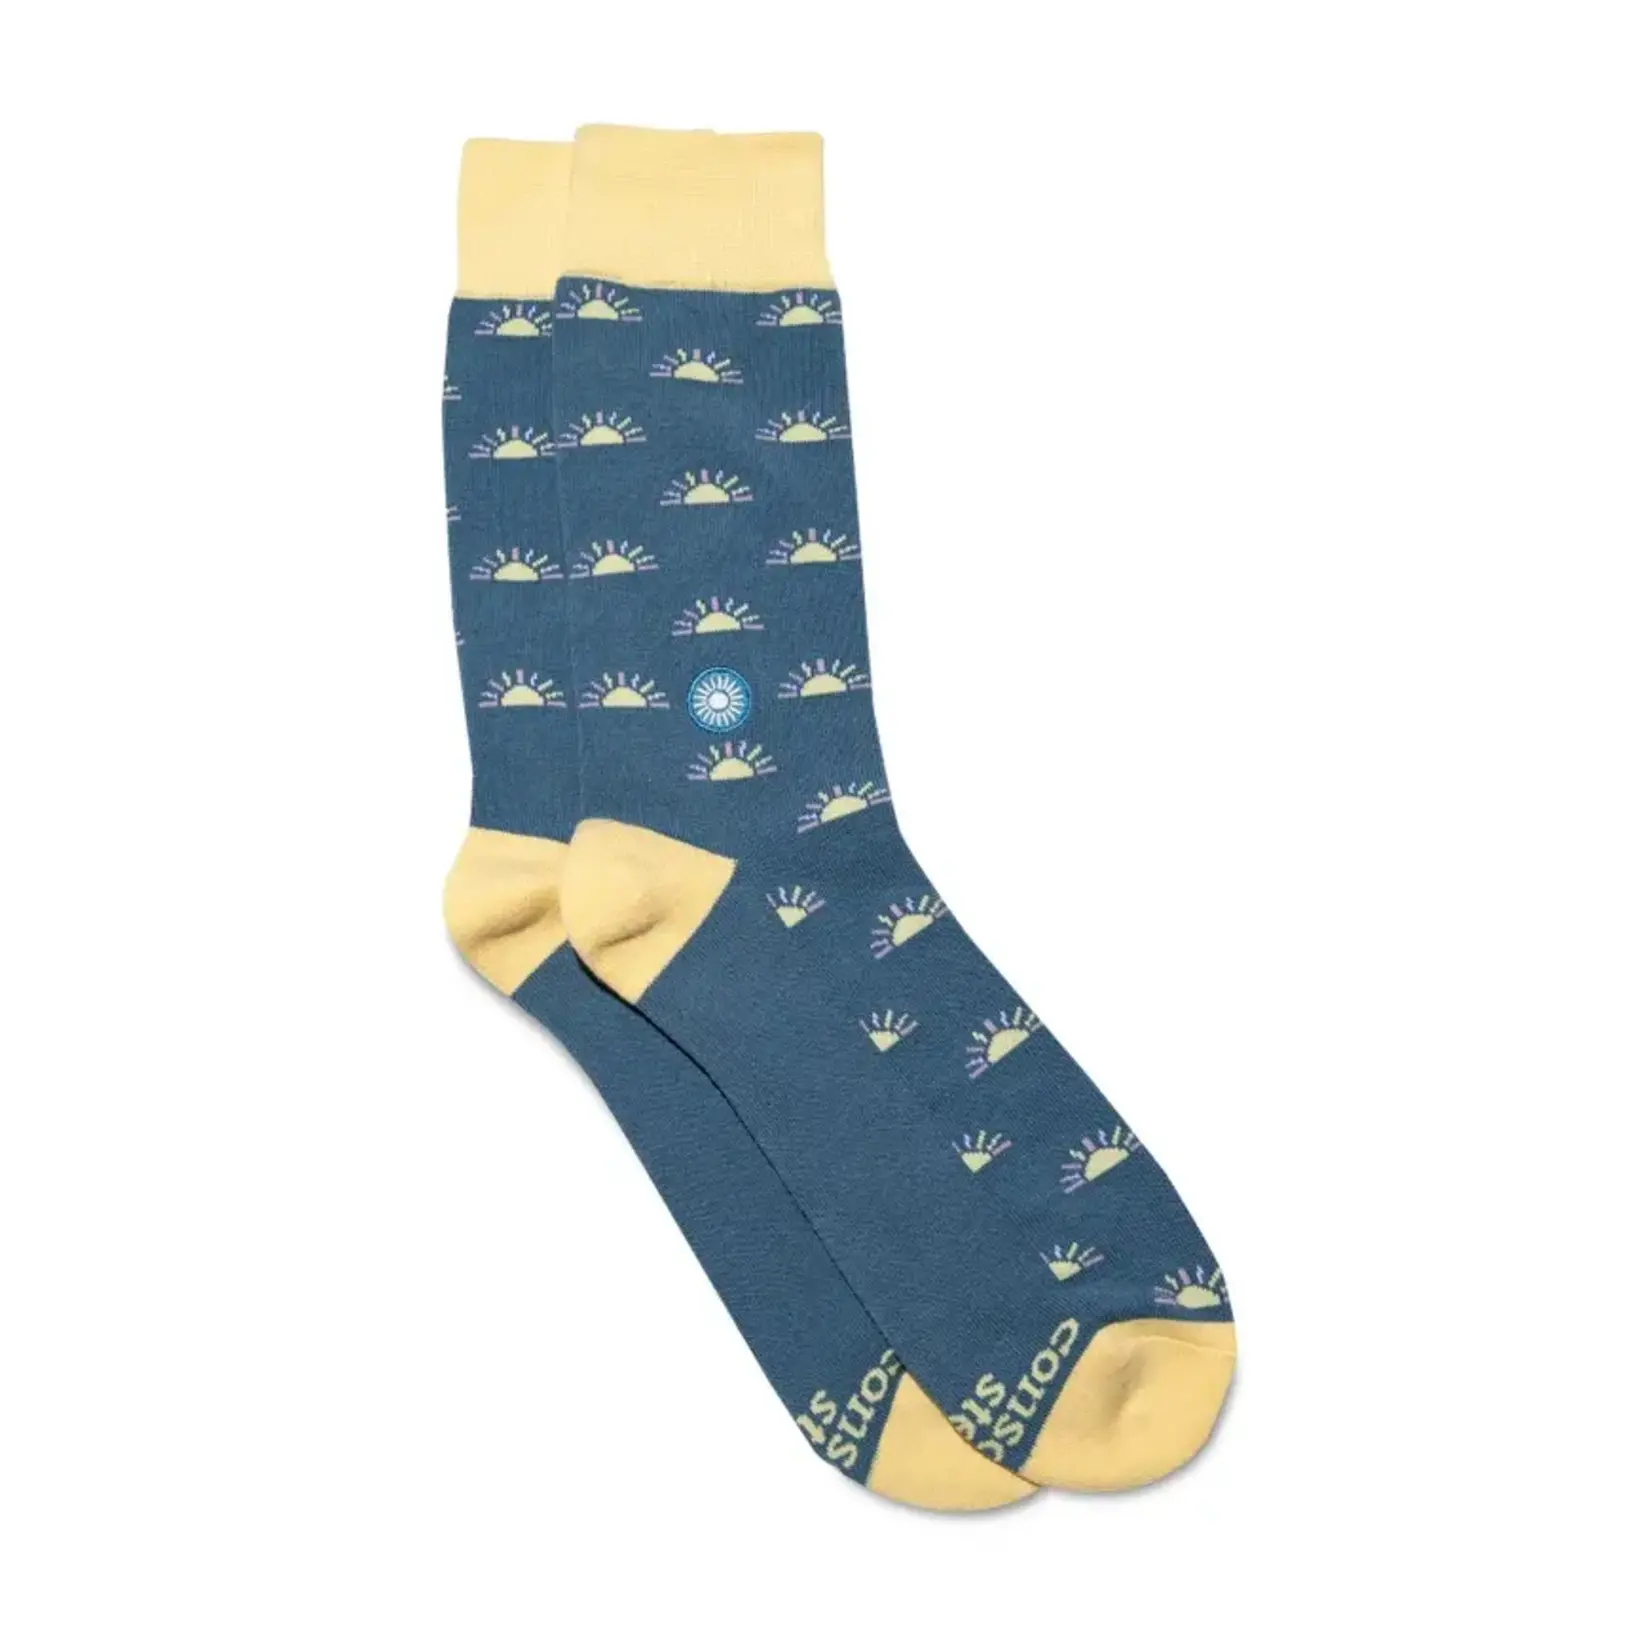 Socks that Support Mental Health (Rising Suns) | Small